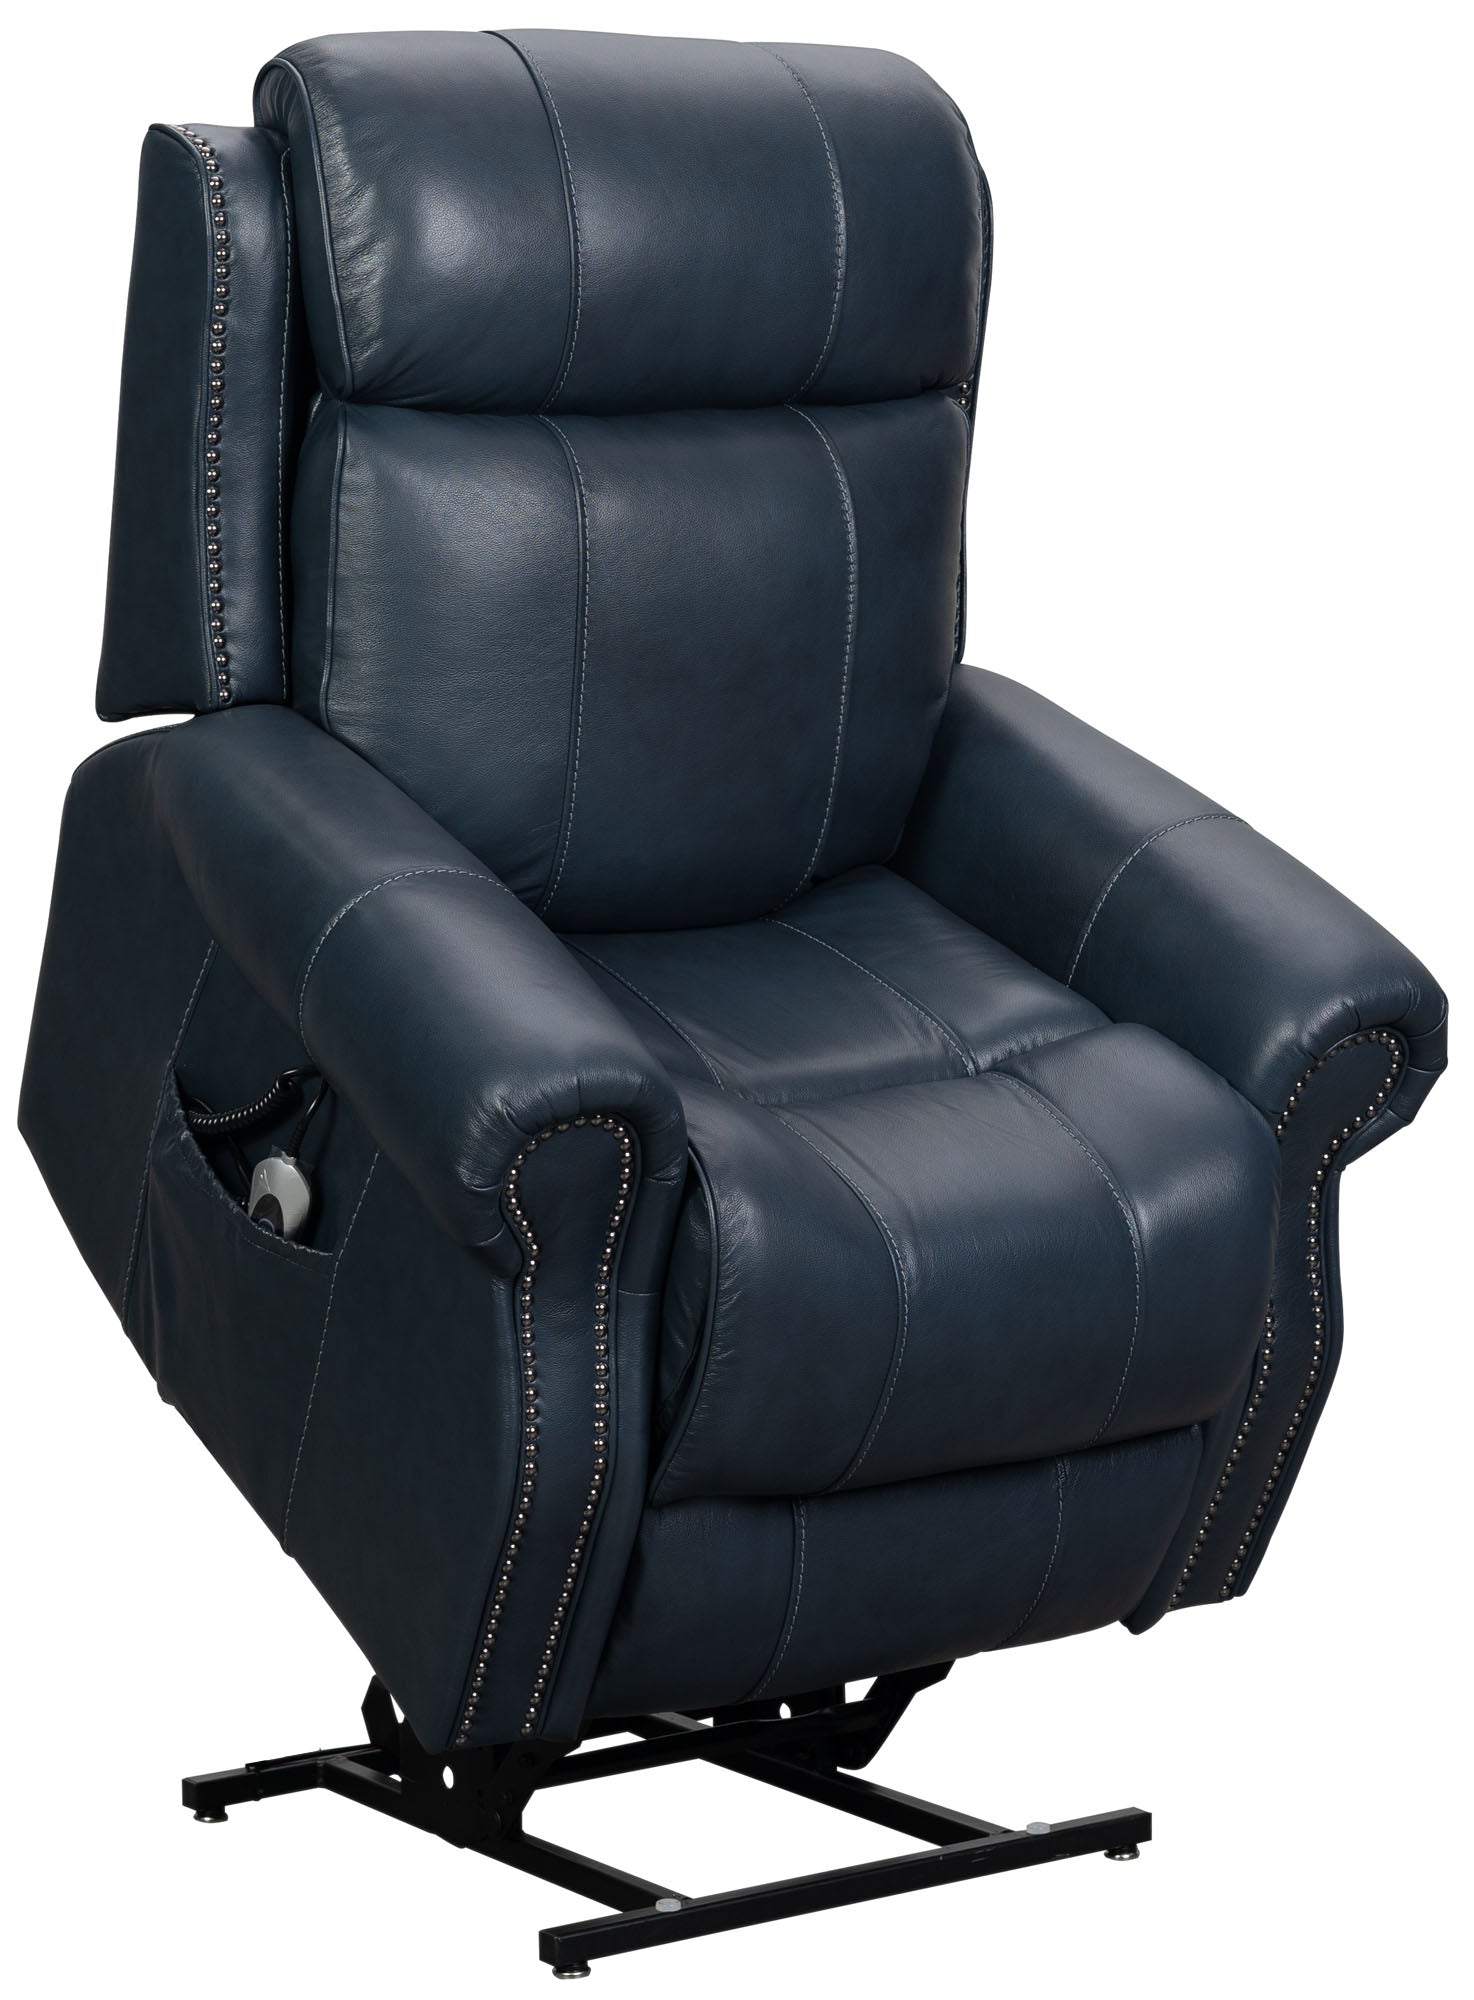 Barcalounger Langston Leather Power Recliner Lift Chair Lift And Massage Chairs